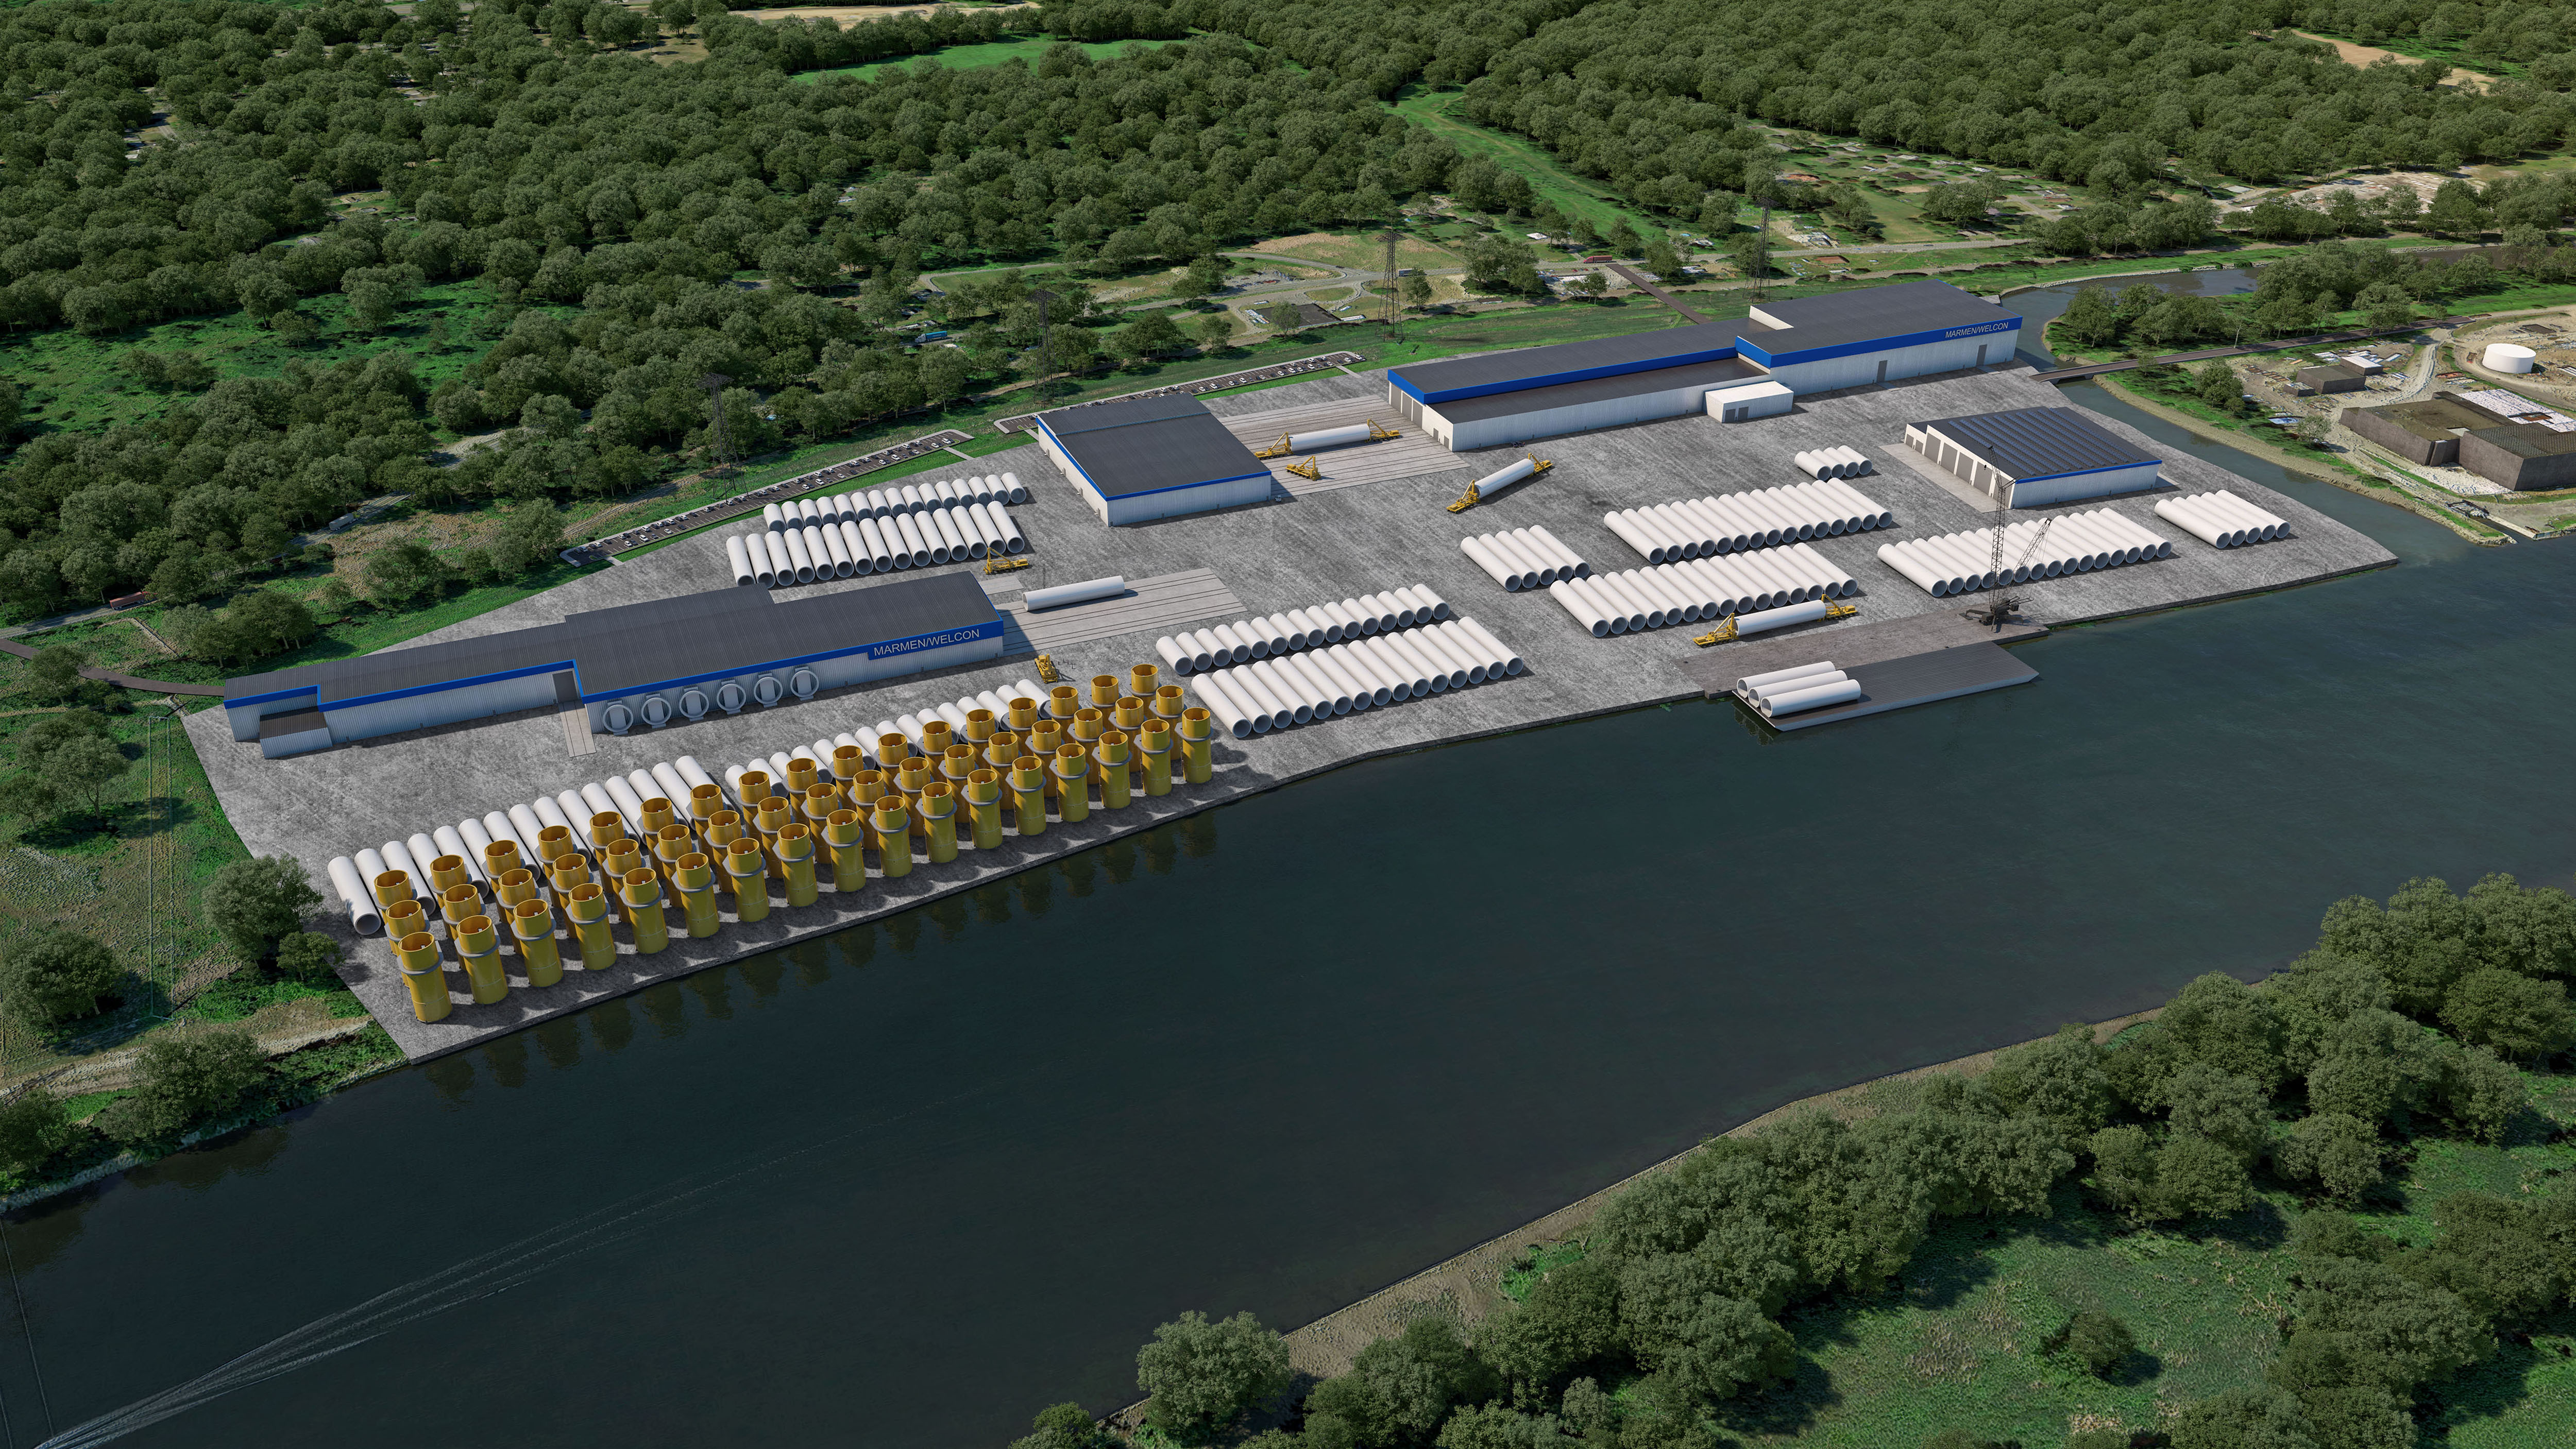 An image rendering Equinor's manufaturing site at Port of Albany